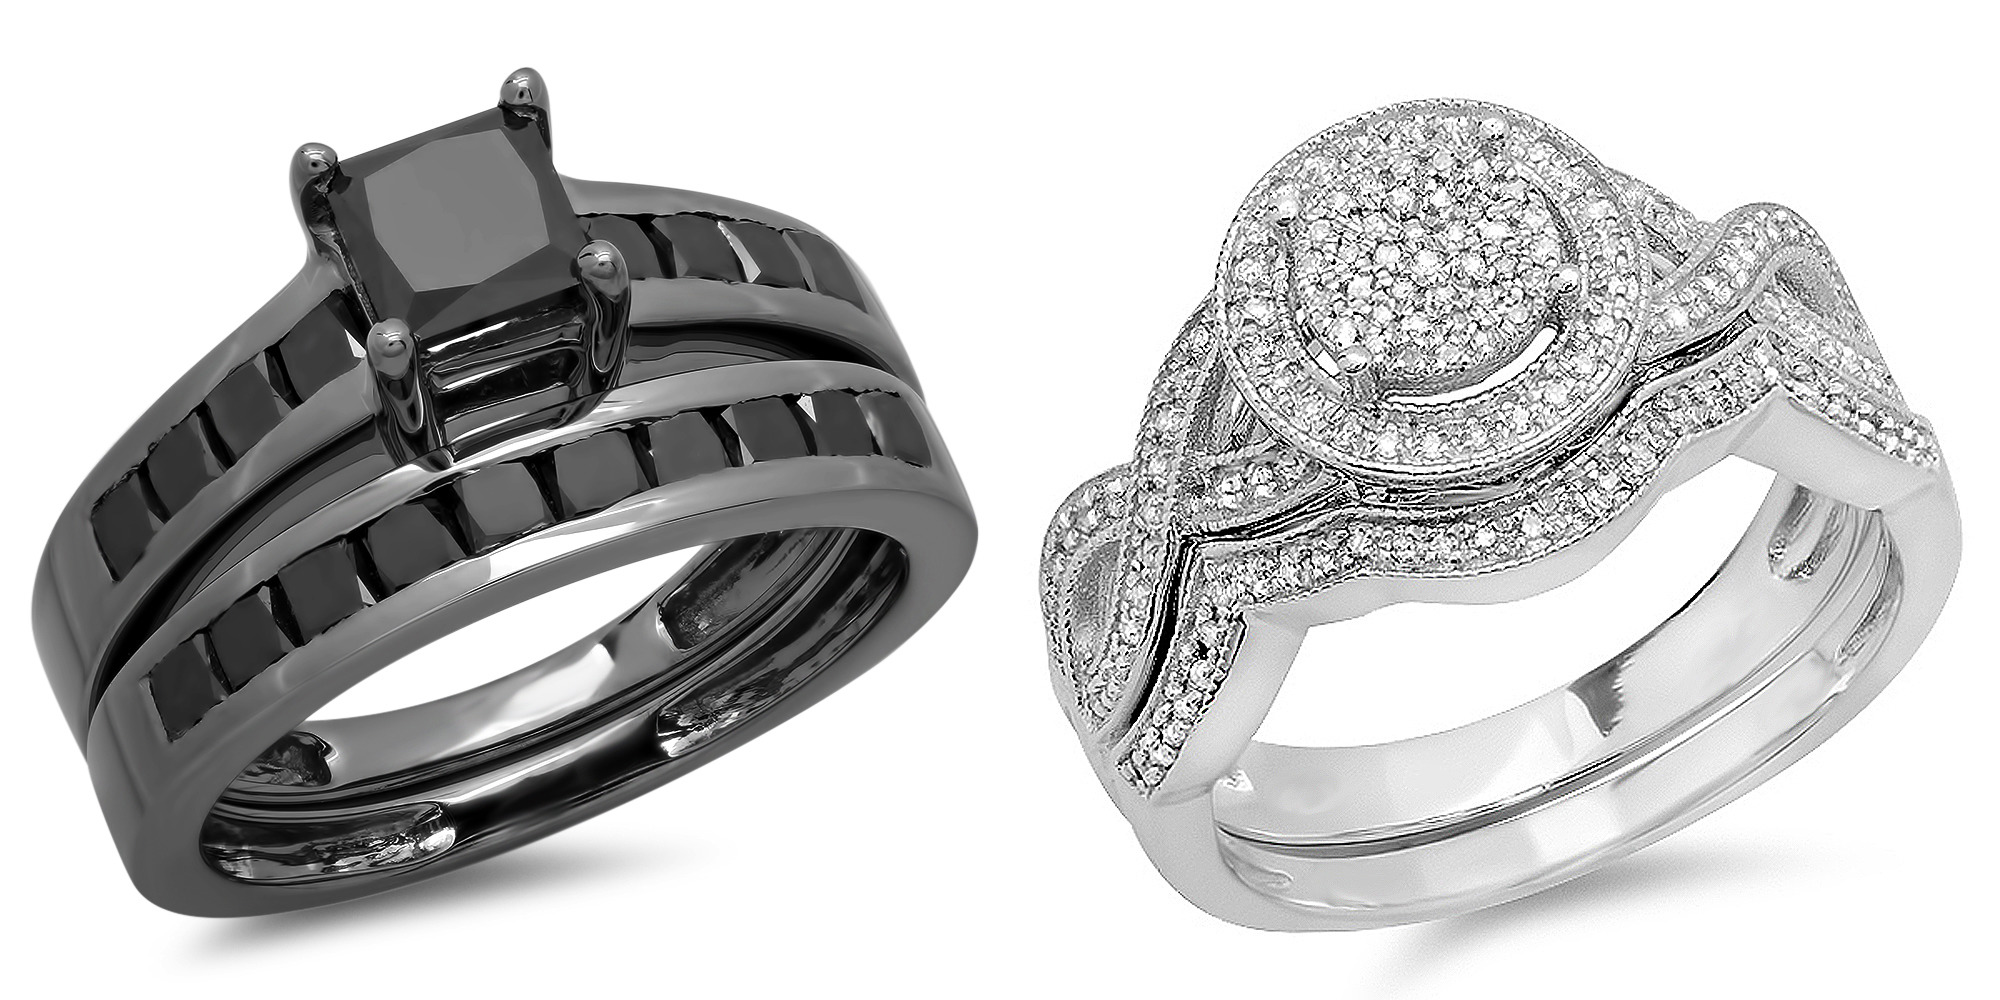 How Sterling Silver Diamond Jewelry is Becoming a Rage - dazzling rock